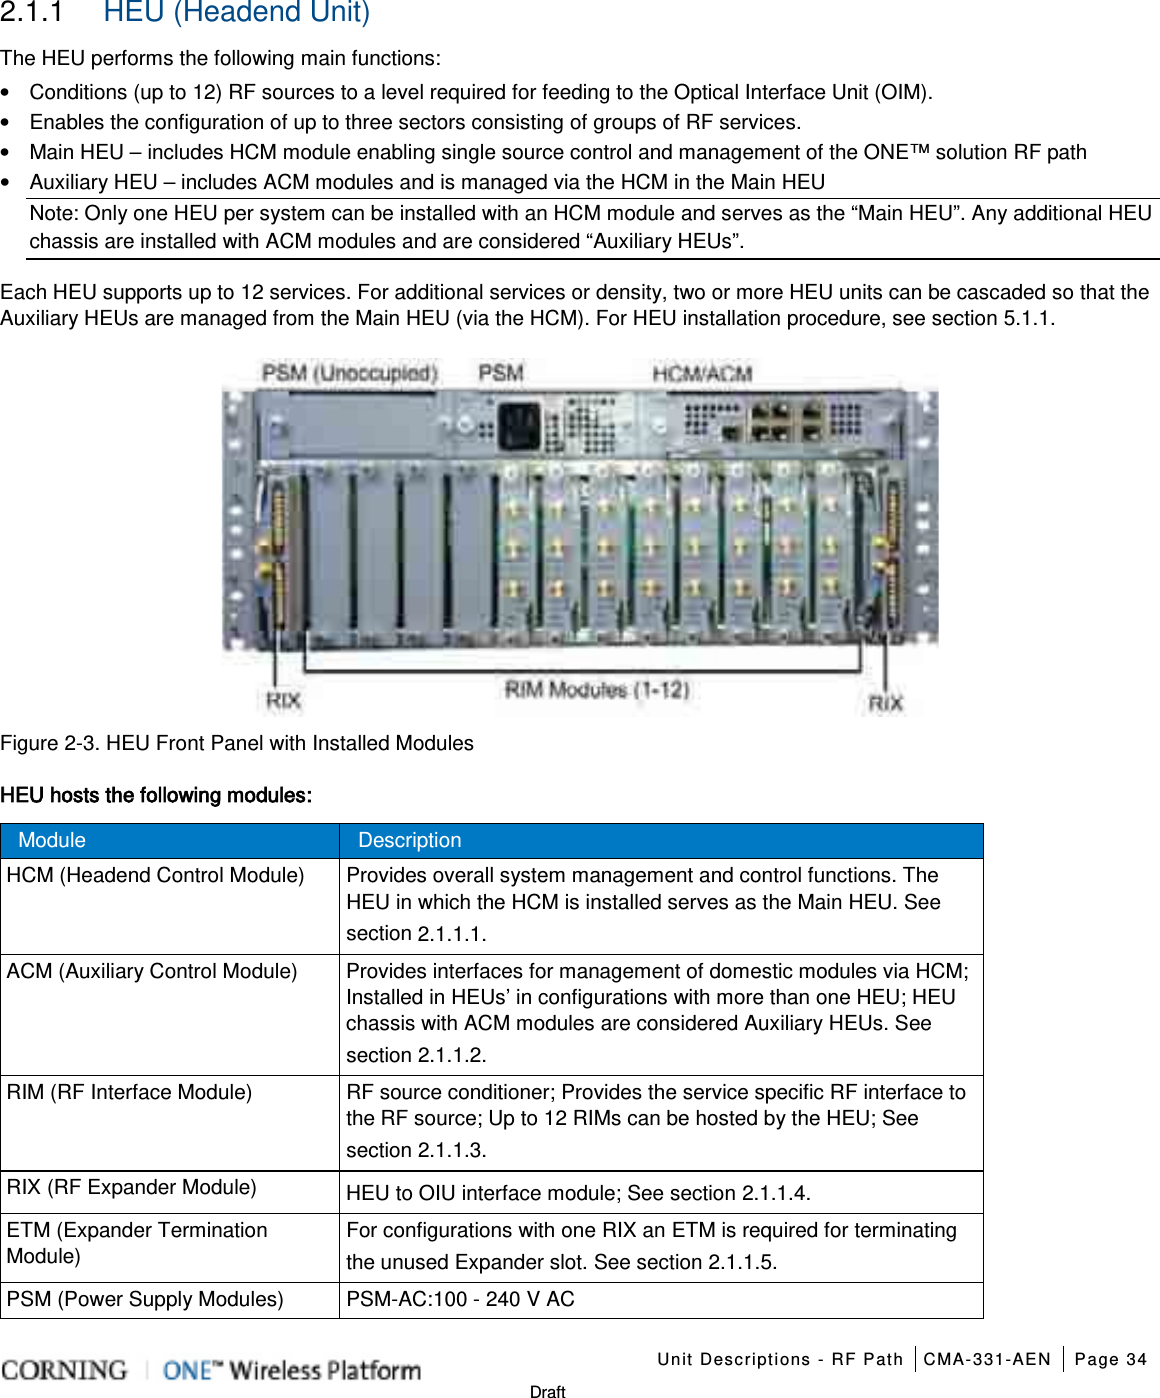    Unit Descriptions - RF Path CMA-331-AEN Page 34   Draft 2.1.1  HEU (Headend Unit) The HEU performs the following main functions: • Conditions (up to 12) RF sources to a level required for feeding to the Optical Interface Unit (OIM).   • Enables the configuration of up to three sectors consisting of groups of RF services. • Main HEU – includes HCM module enabling single source control and management of the ONE™ solution RF path   • Auxiliary HEU – includes ACM modules and is managed via the HCM in the Main HEU Note: Only one HEU per system can be installed with an HCM module and serves as the “Main HEU”. Any additional HEU chassis are installed with ACM modules and are considered “Auxiliary HEUs”. Each HEU supports up to 12 services. For additional services or density, two or more HEU units can be cascaded so that the Auxiliary HEUs are managed from the Main HEU (via the HCM). For HEU installation procedure, see section  5.1.1.  Figure  2-3. HEU Front Panel with Installed Modules HEU hosts the following modules: Module Description HCM (Headend Control Module)    Provides overall system management and control functions. The HEU in which the HCM is installed serves as the Main HEU. See section  2.1.1.1. ACM (Auxiliary Control Module) Provides interfaces for management of domestic modules via HCM; Installed in HEUs’ in configurations with more than one HEU; HEU chassis with ACM modules are considered Auxiliary HEUs. See section  2.1.1.2. RIM (RF Interface Module) RF source conditioner; Provides the service specific RF interface to the RF source; Up to 12 RIMs can be hosted by the HEU; See section  2.1.1.3. RIX (RF Expander Module)   HEU to OIU interface module; See section  2.1.1.4. ETM (Expander Termination Module) For configurations with one RIX an ETM is required for terminating the unused Expander slot. See section  2.1.1.5. PSM (Power Supply Modules) PSM-AC:100 - 240 V AC   